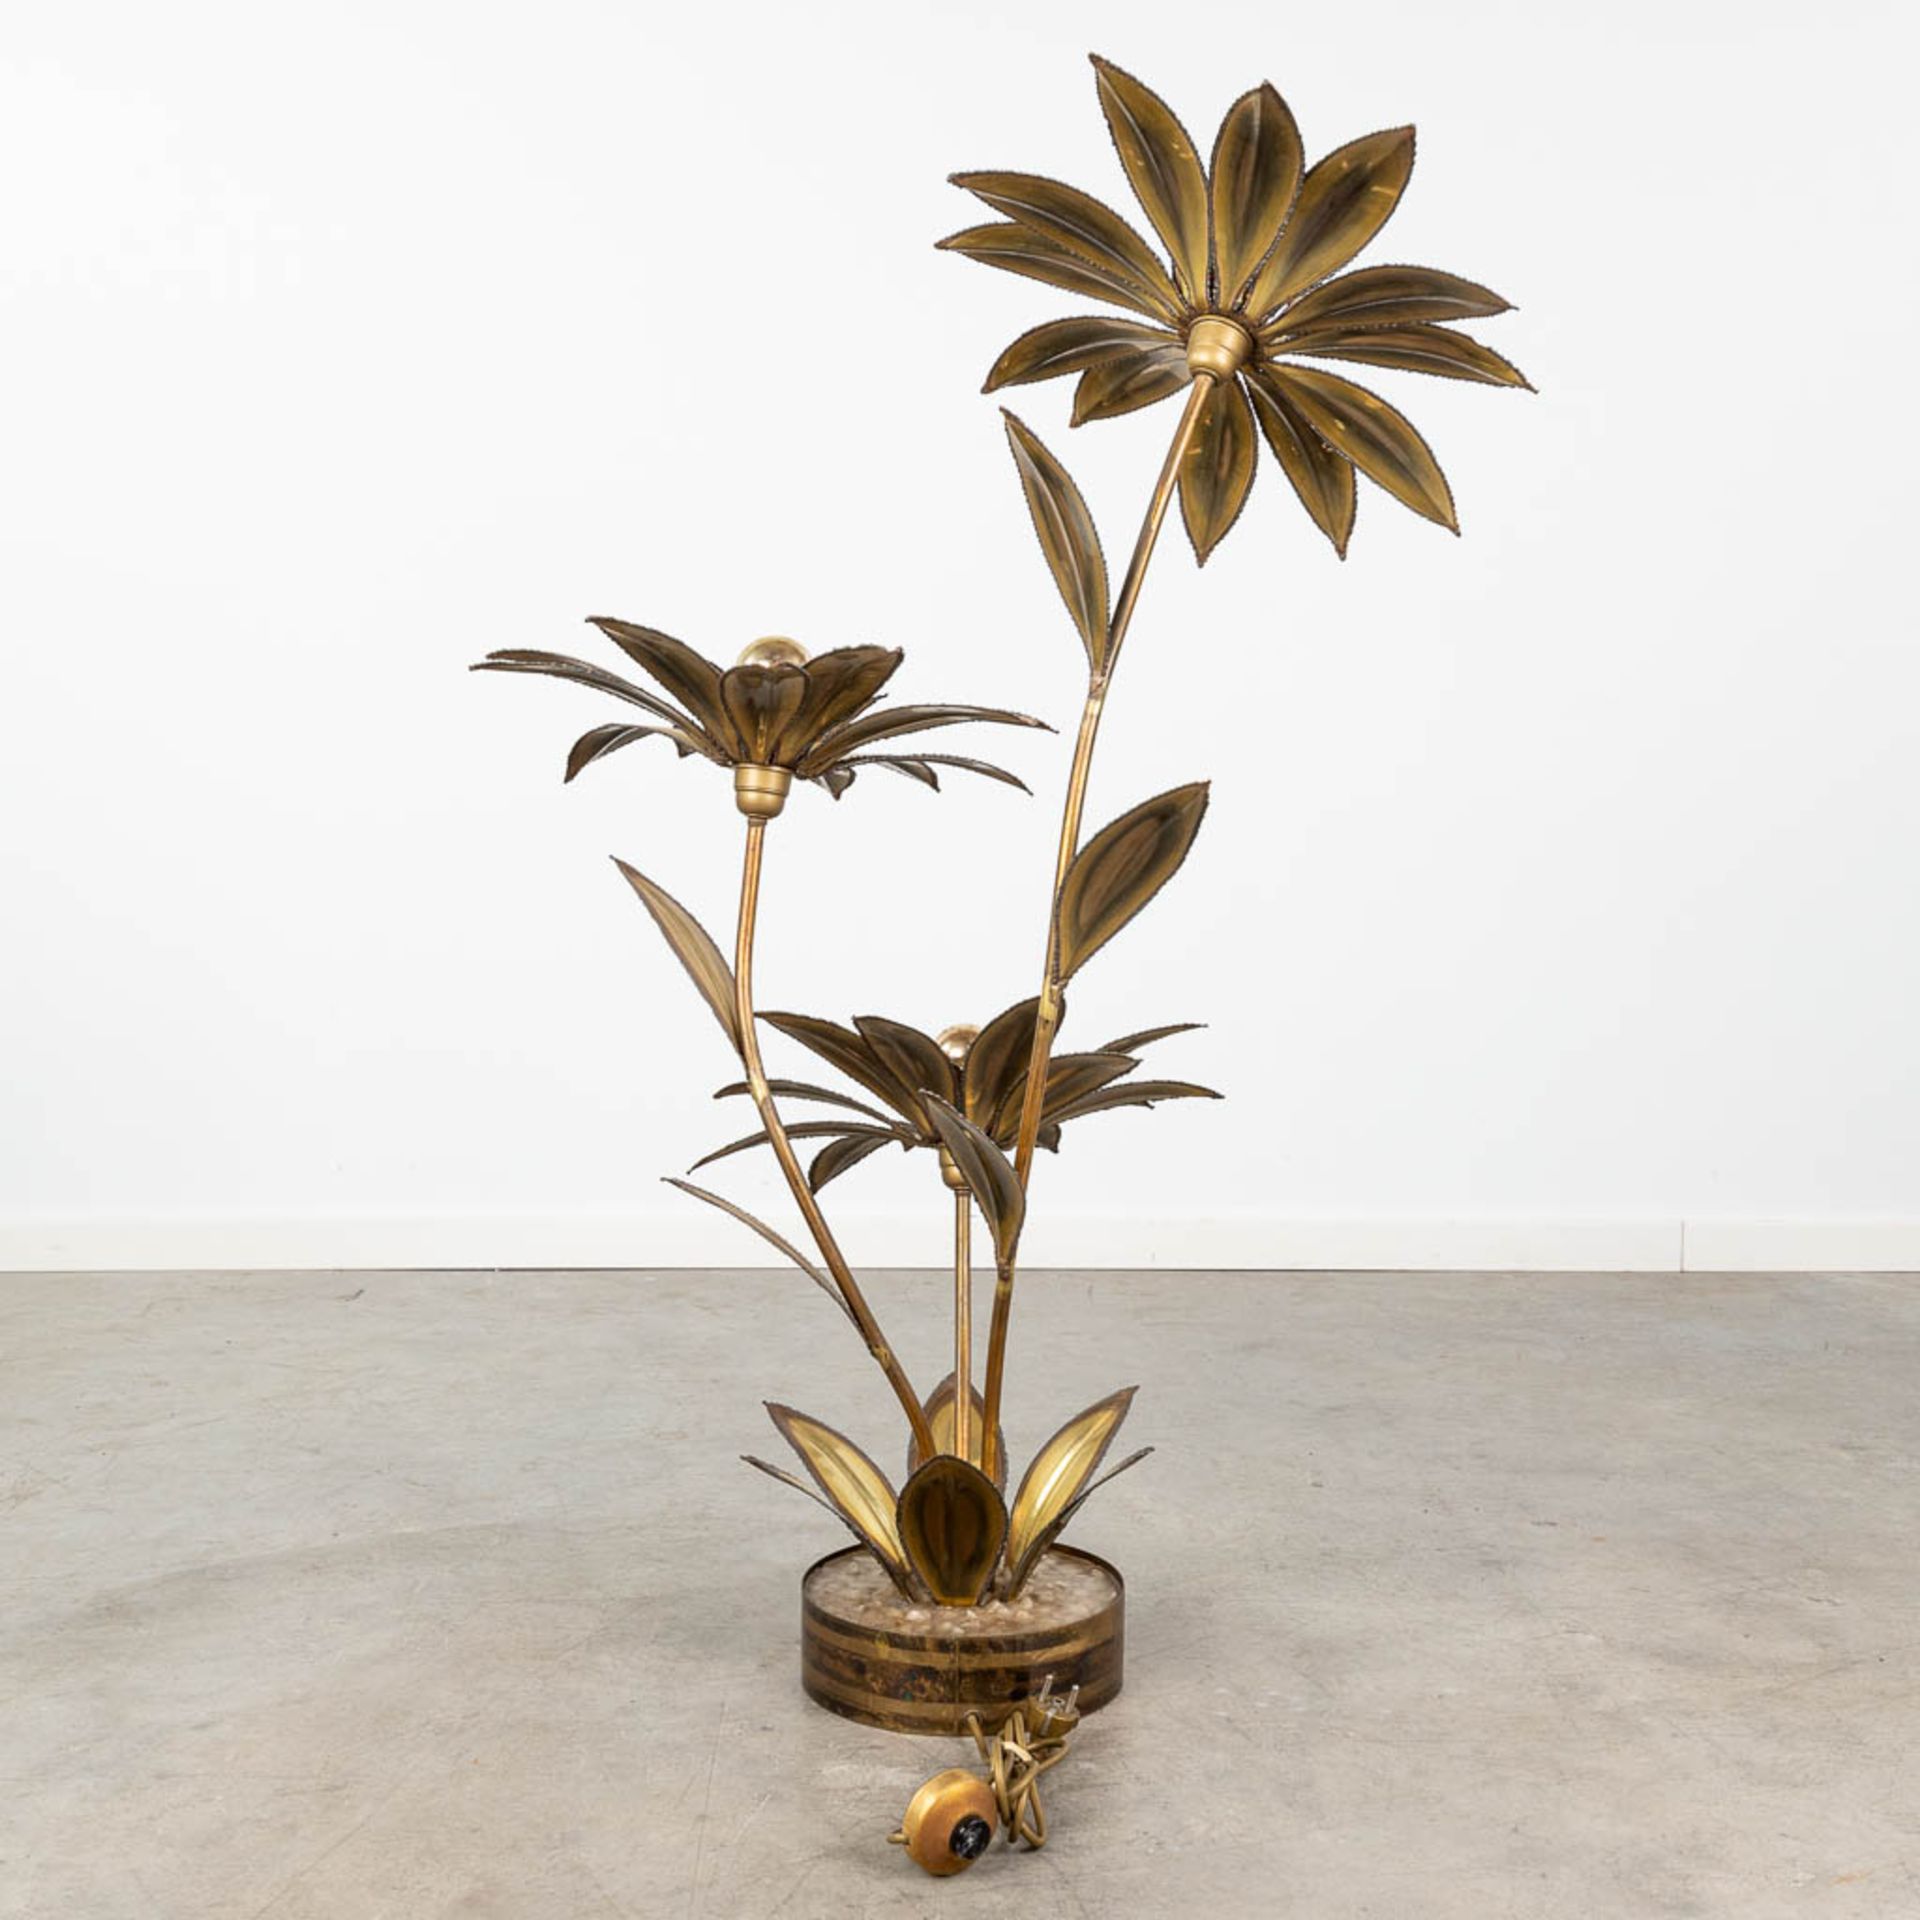 Maison Janssen, a table lamp made of metal flowers. (L:57 x W:68 x H:112 cm) - Image 8 of 15